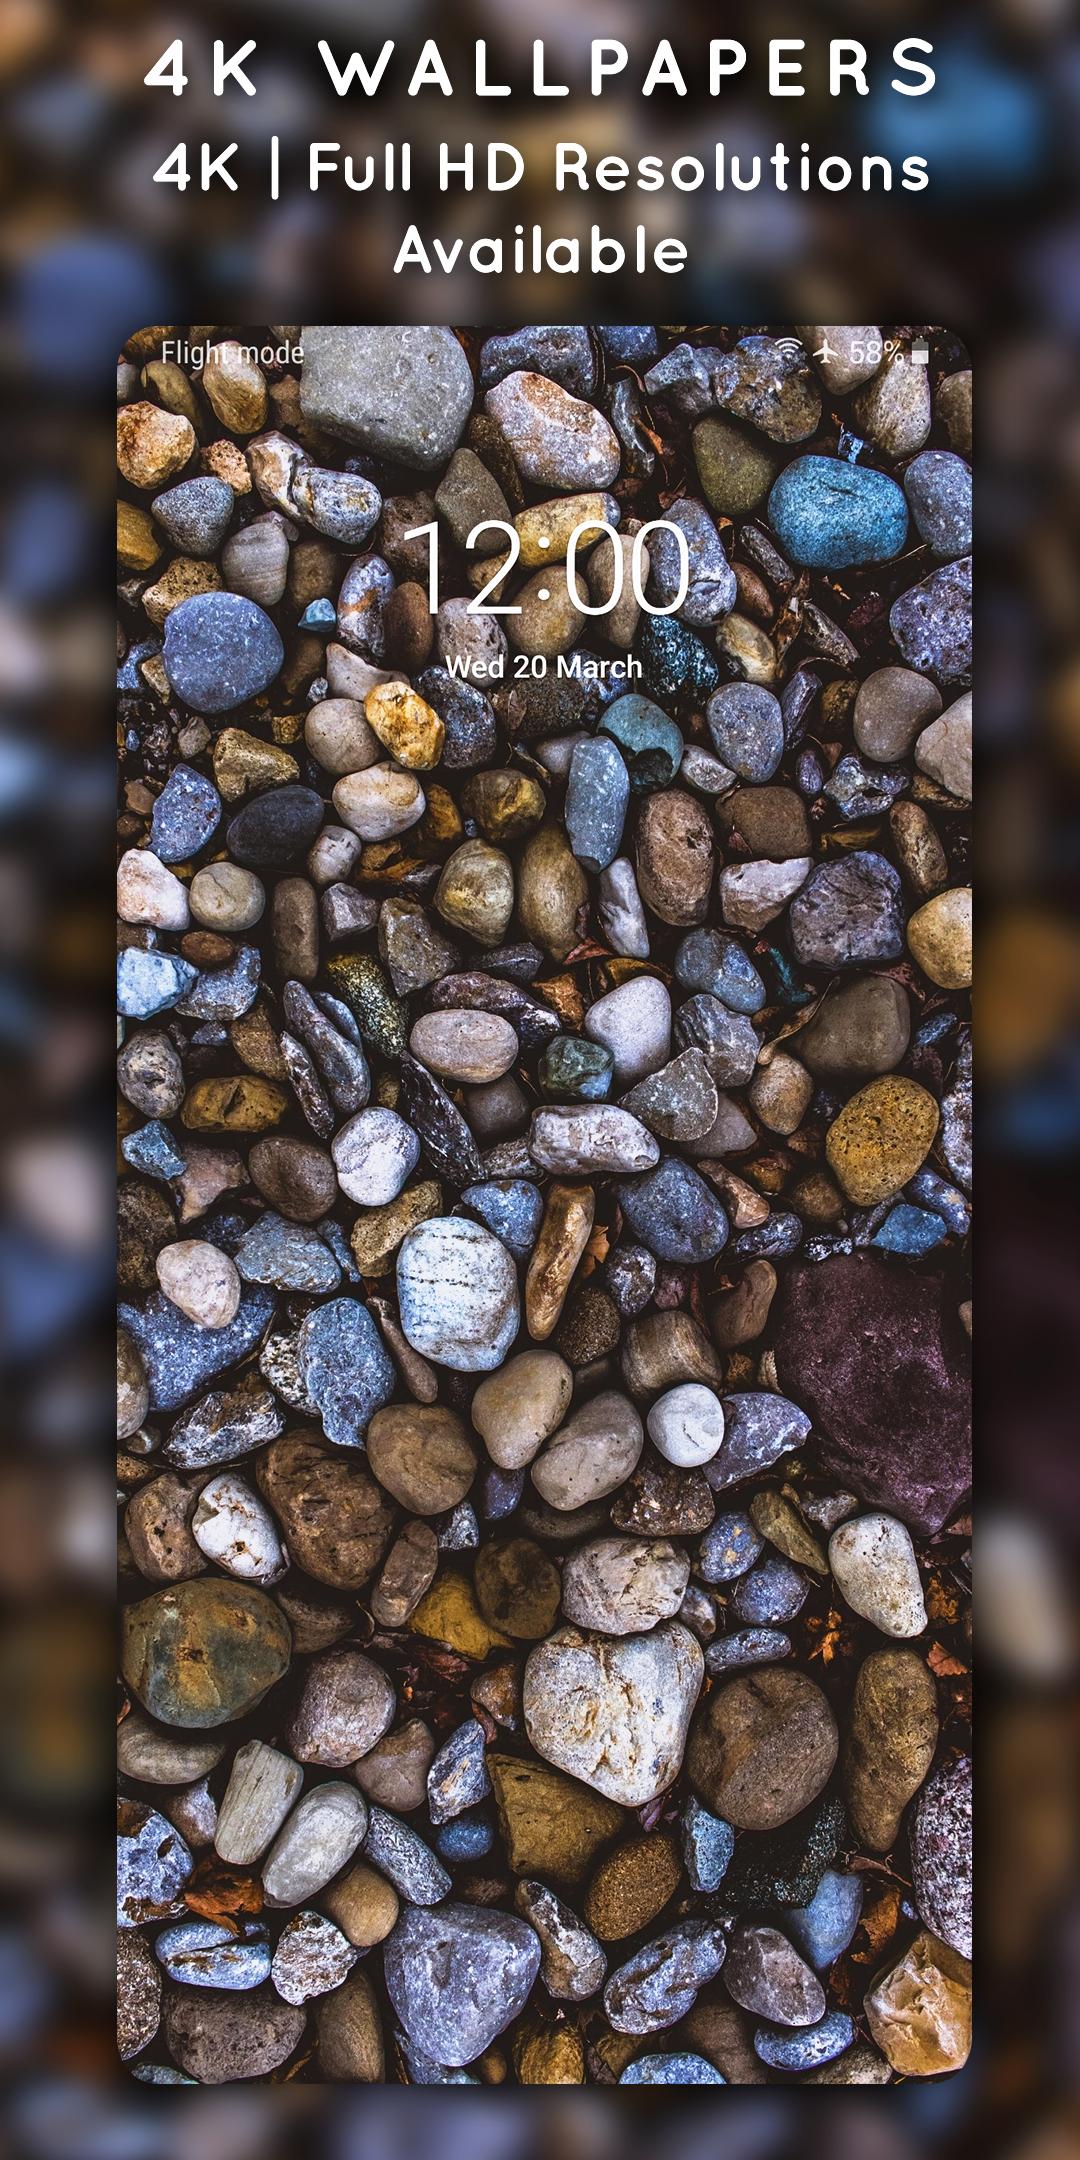 4K Wallpapers for Android - APK Download